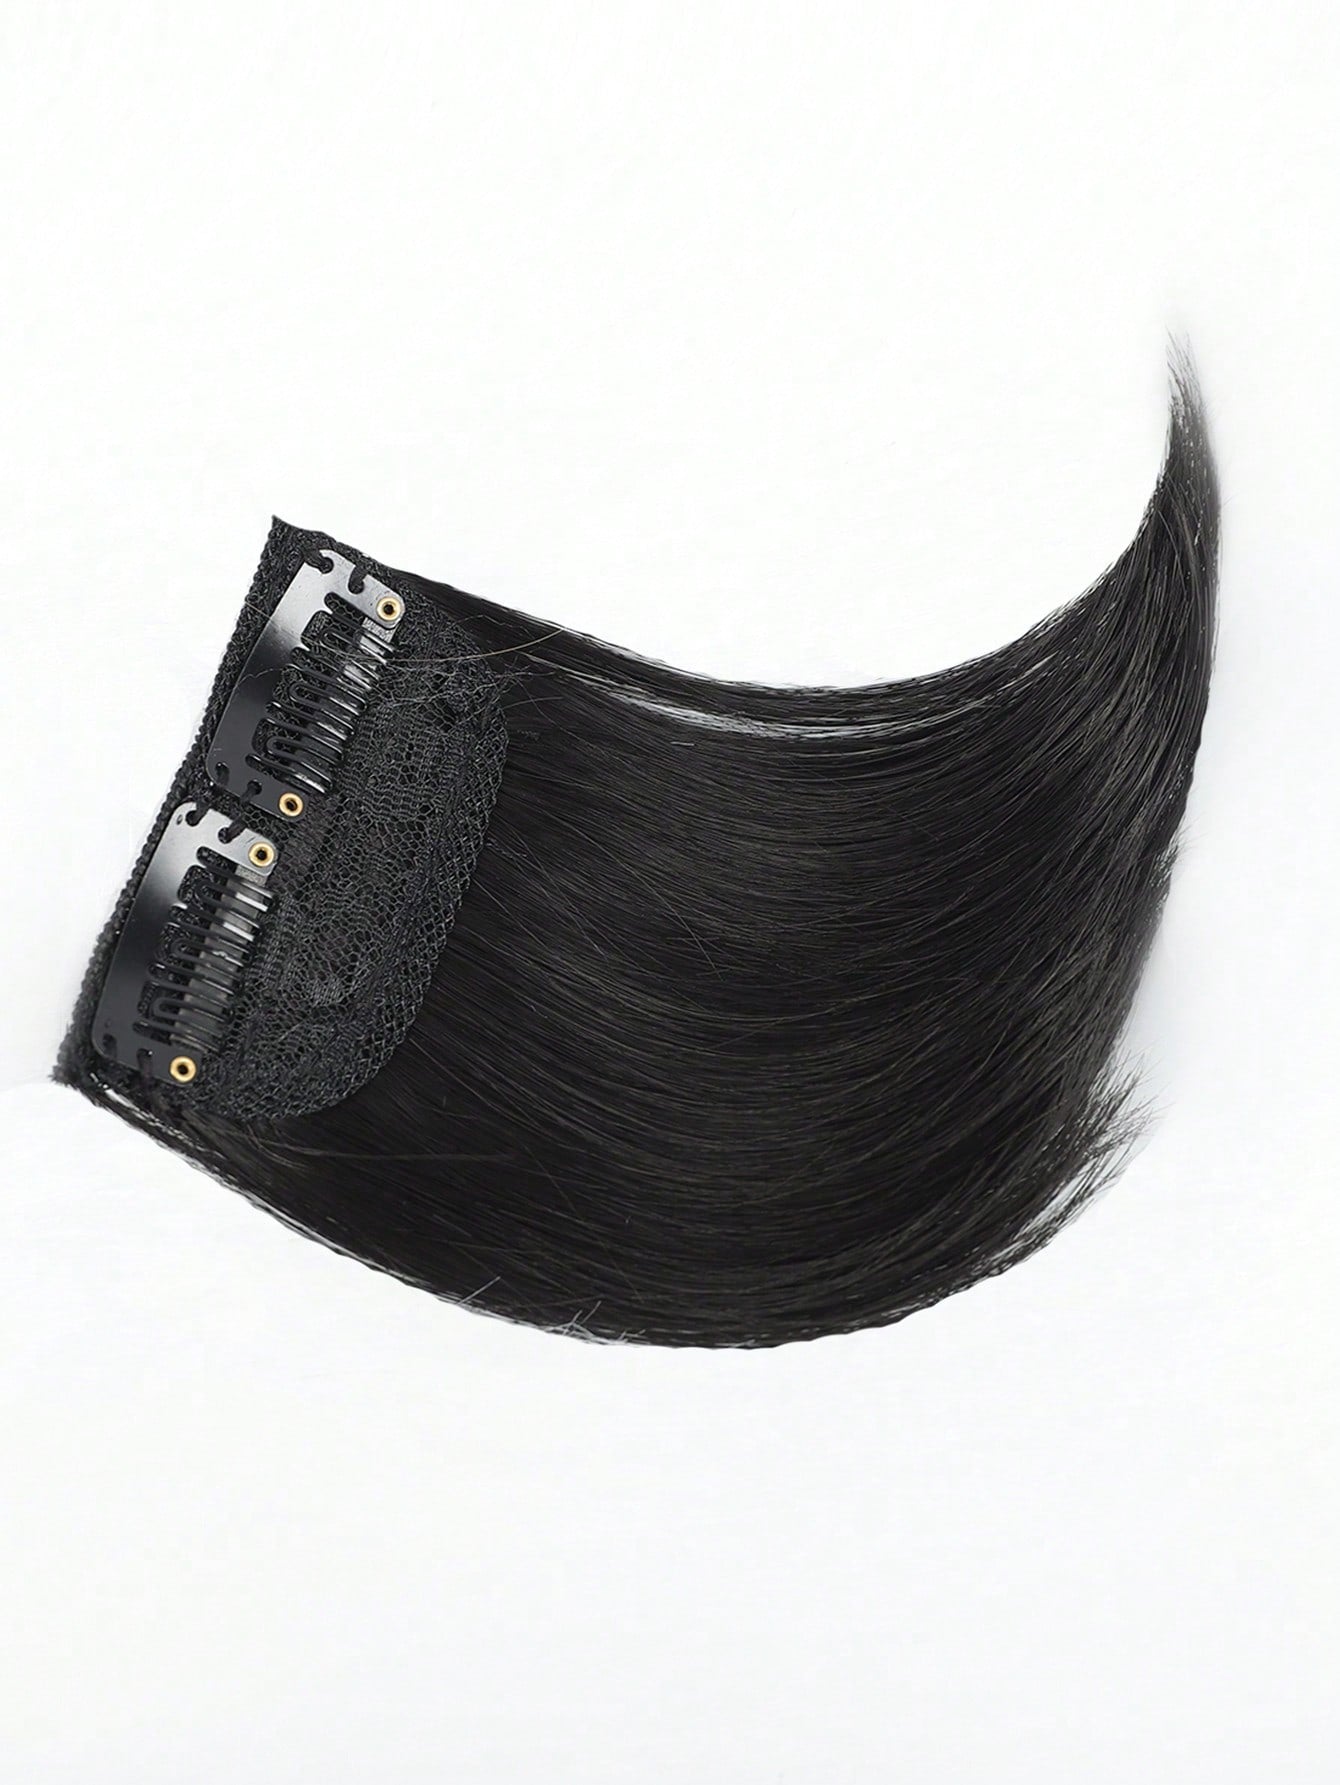 Short Straight Synthetic Hair Extension